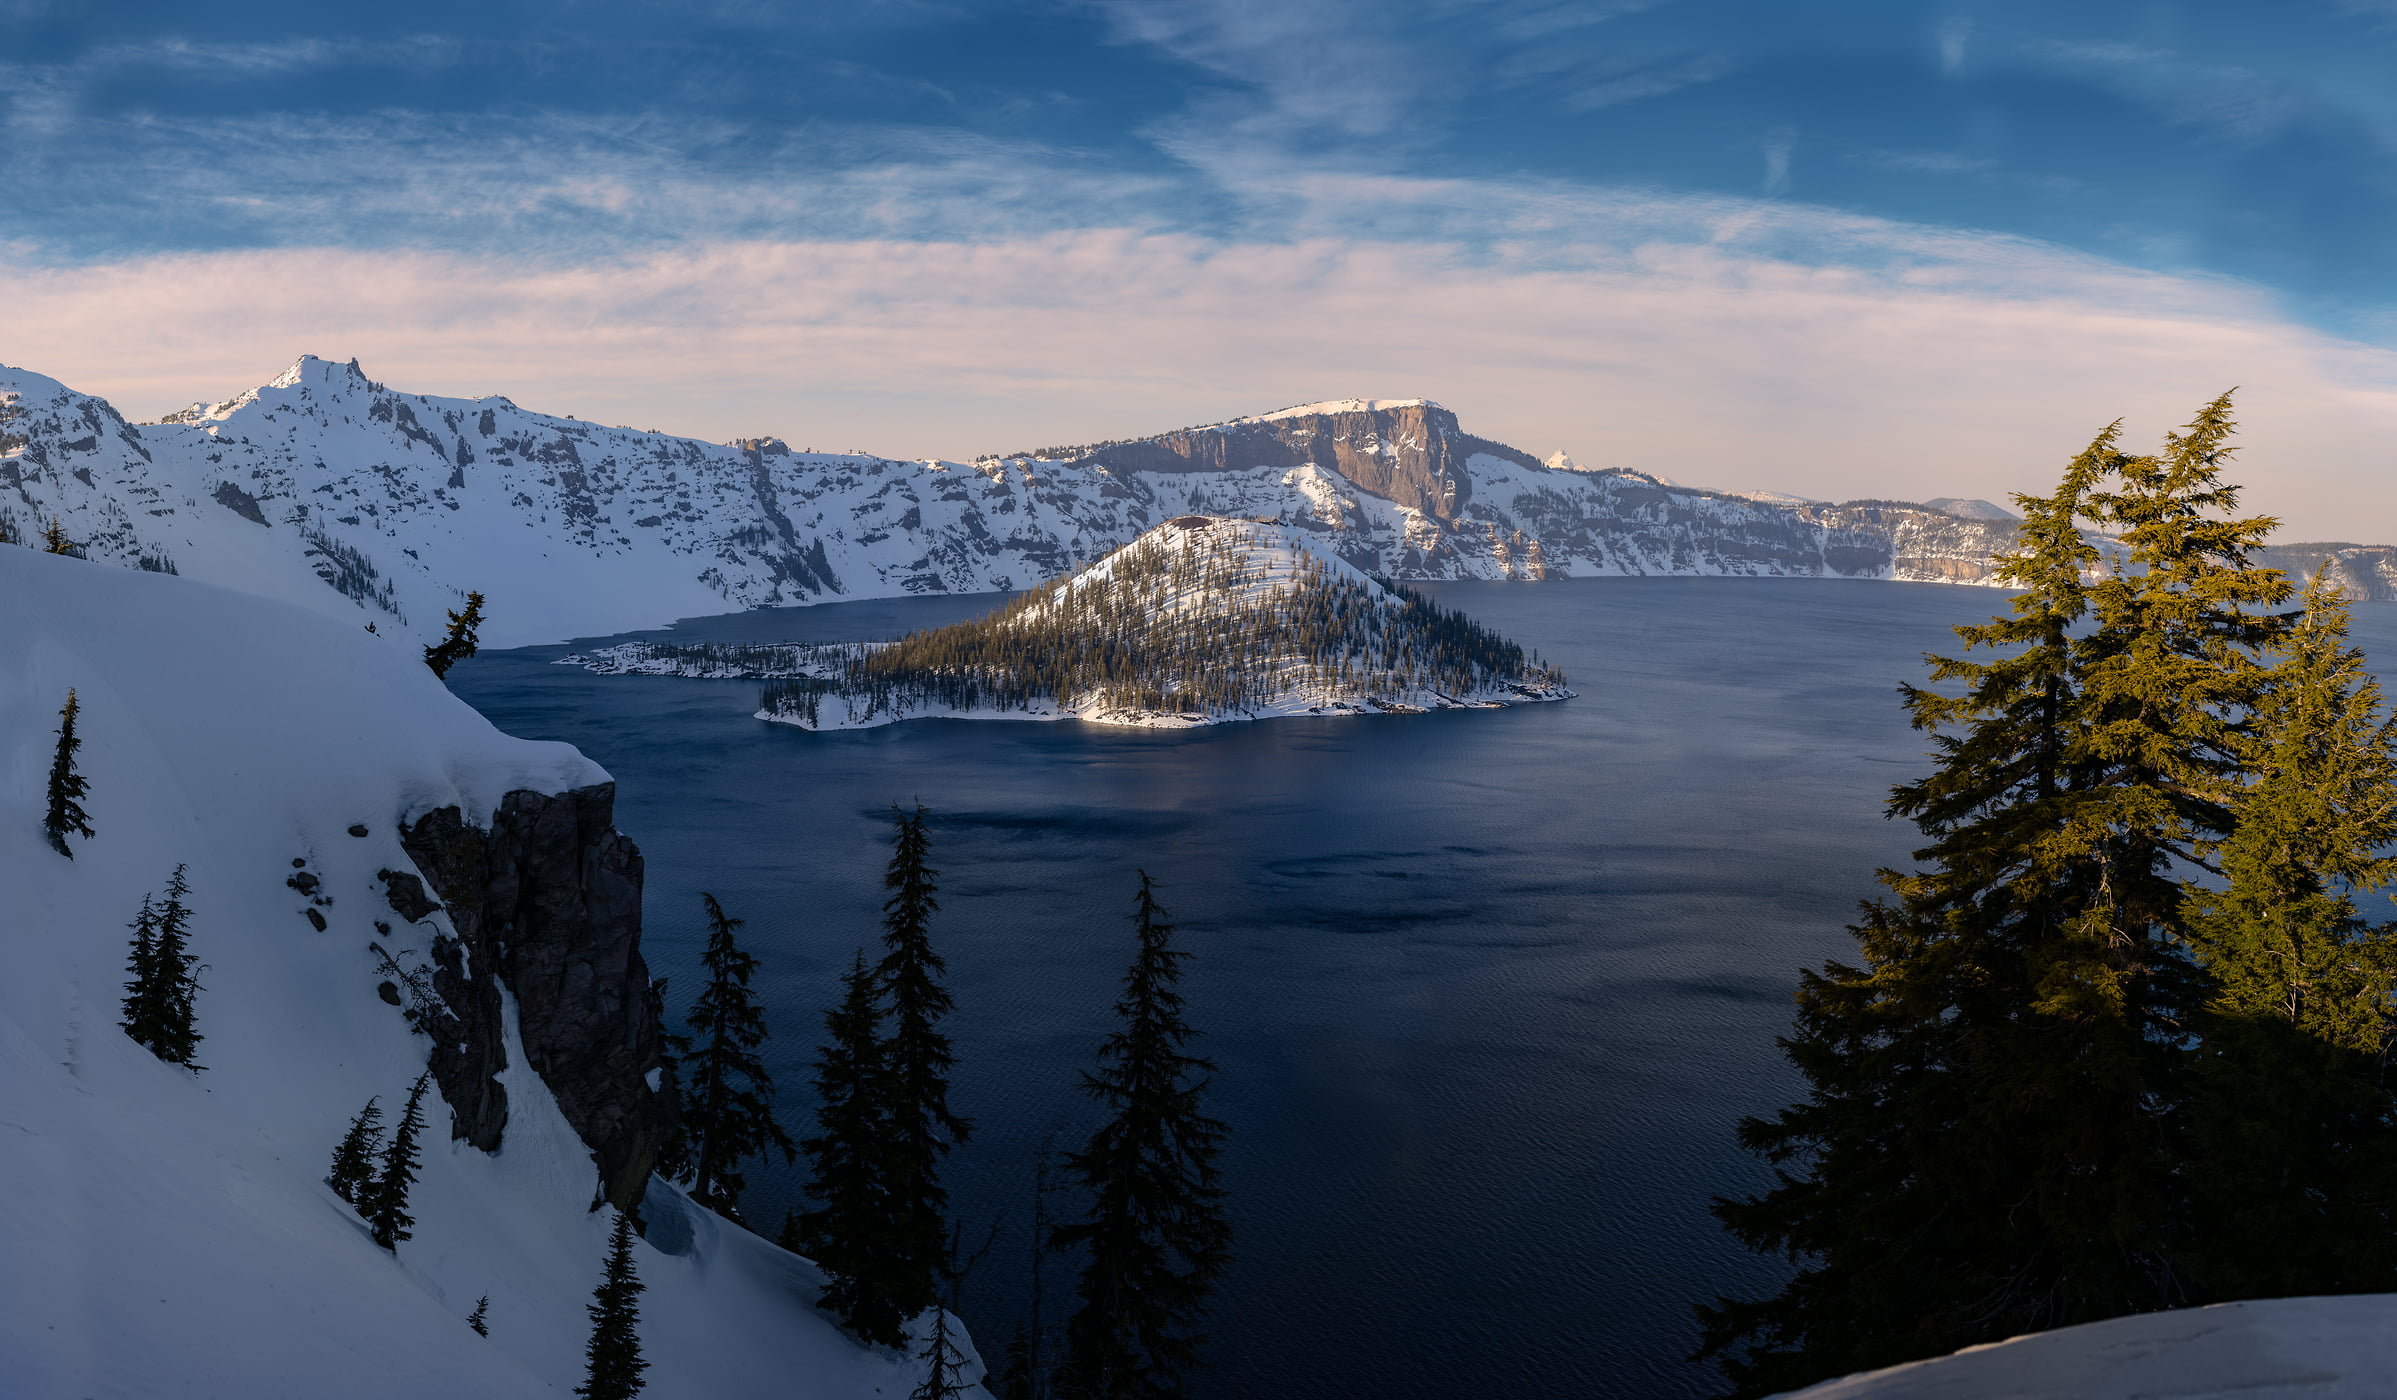 987 megapixels! A very high resolution, large-format VAST photo print of a snowy lake; landscape photograph created by Chris Blake in Crater Lake National Park, Oregon